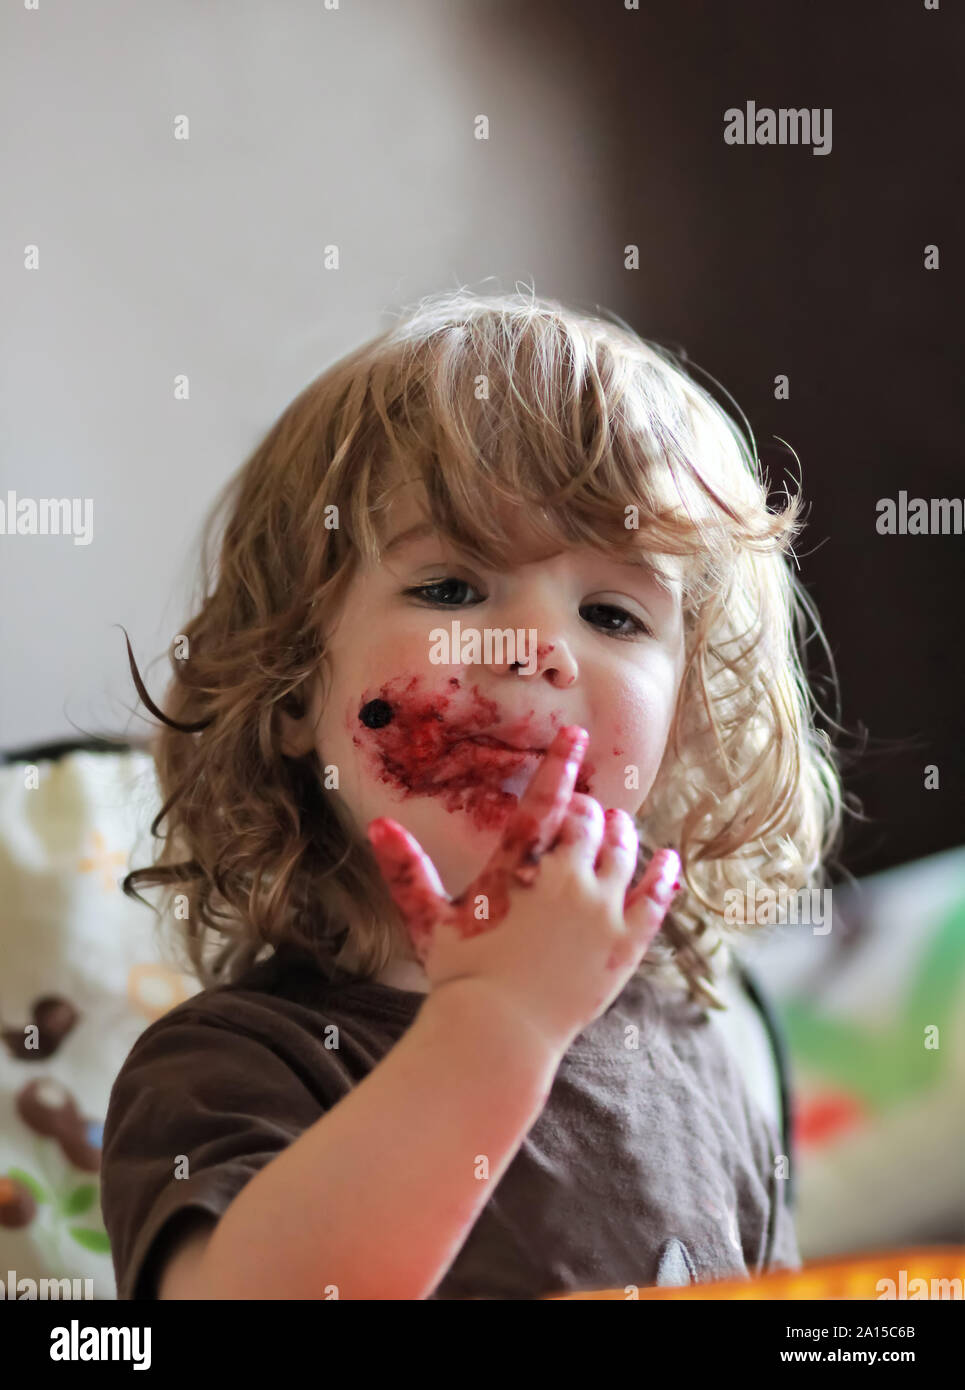 One year old baby girl eating delicious blueberry and black currant pie with her face dirty all over. Stock Photo